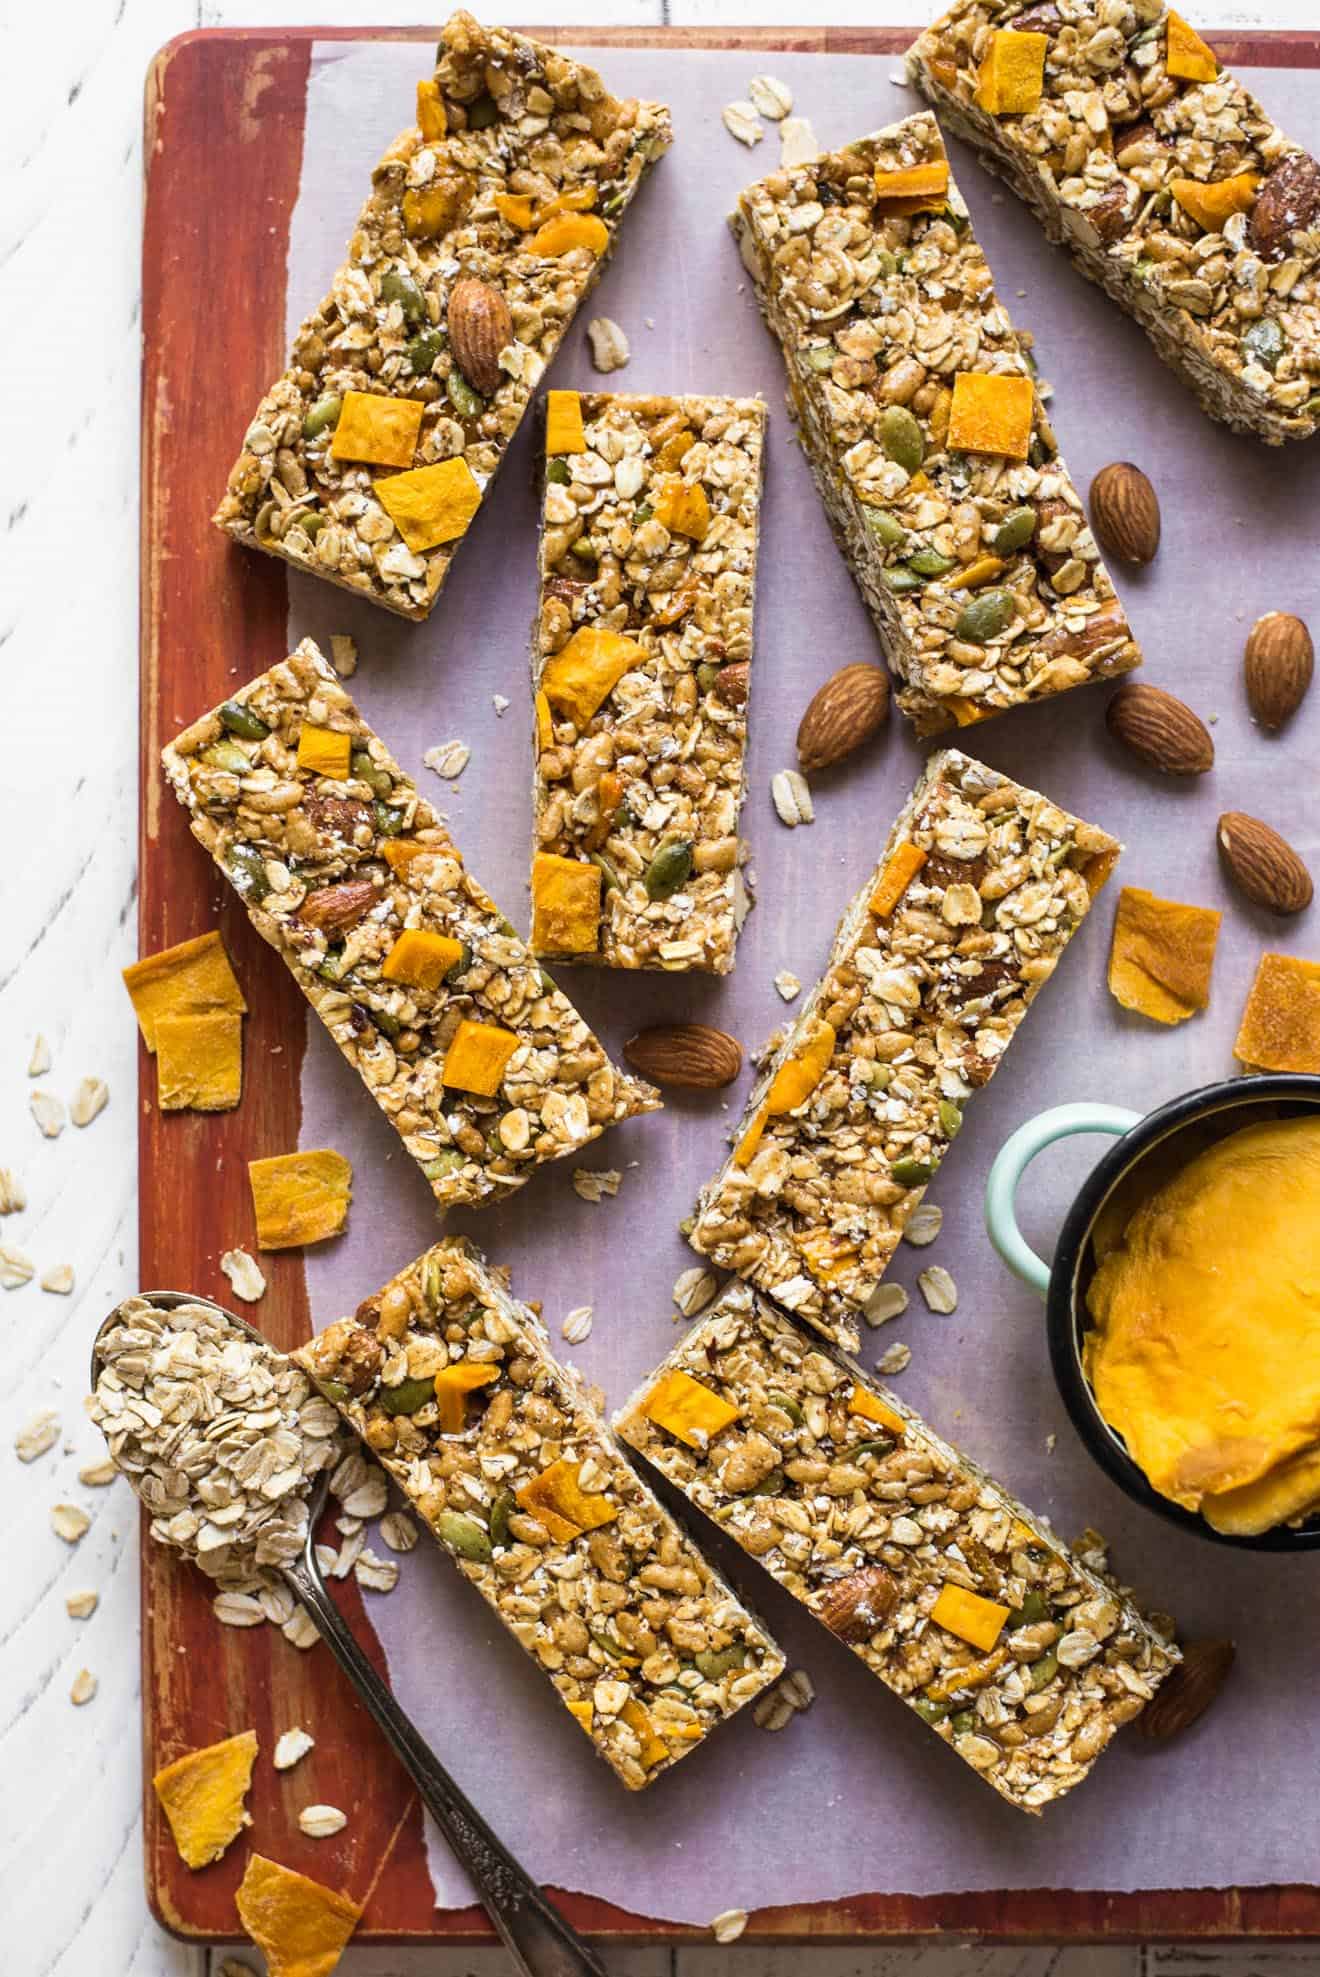 Chili Mango Snack Bars - making granola bars at home is much easier than you think! These healthy snack bars are gluten free!